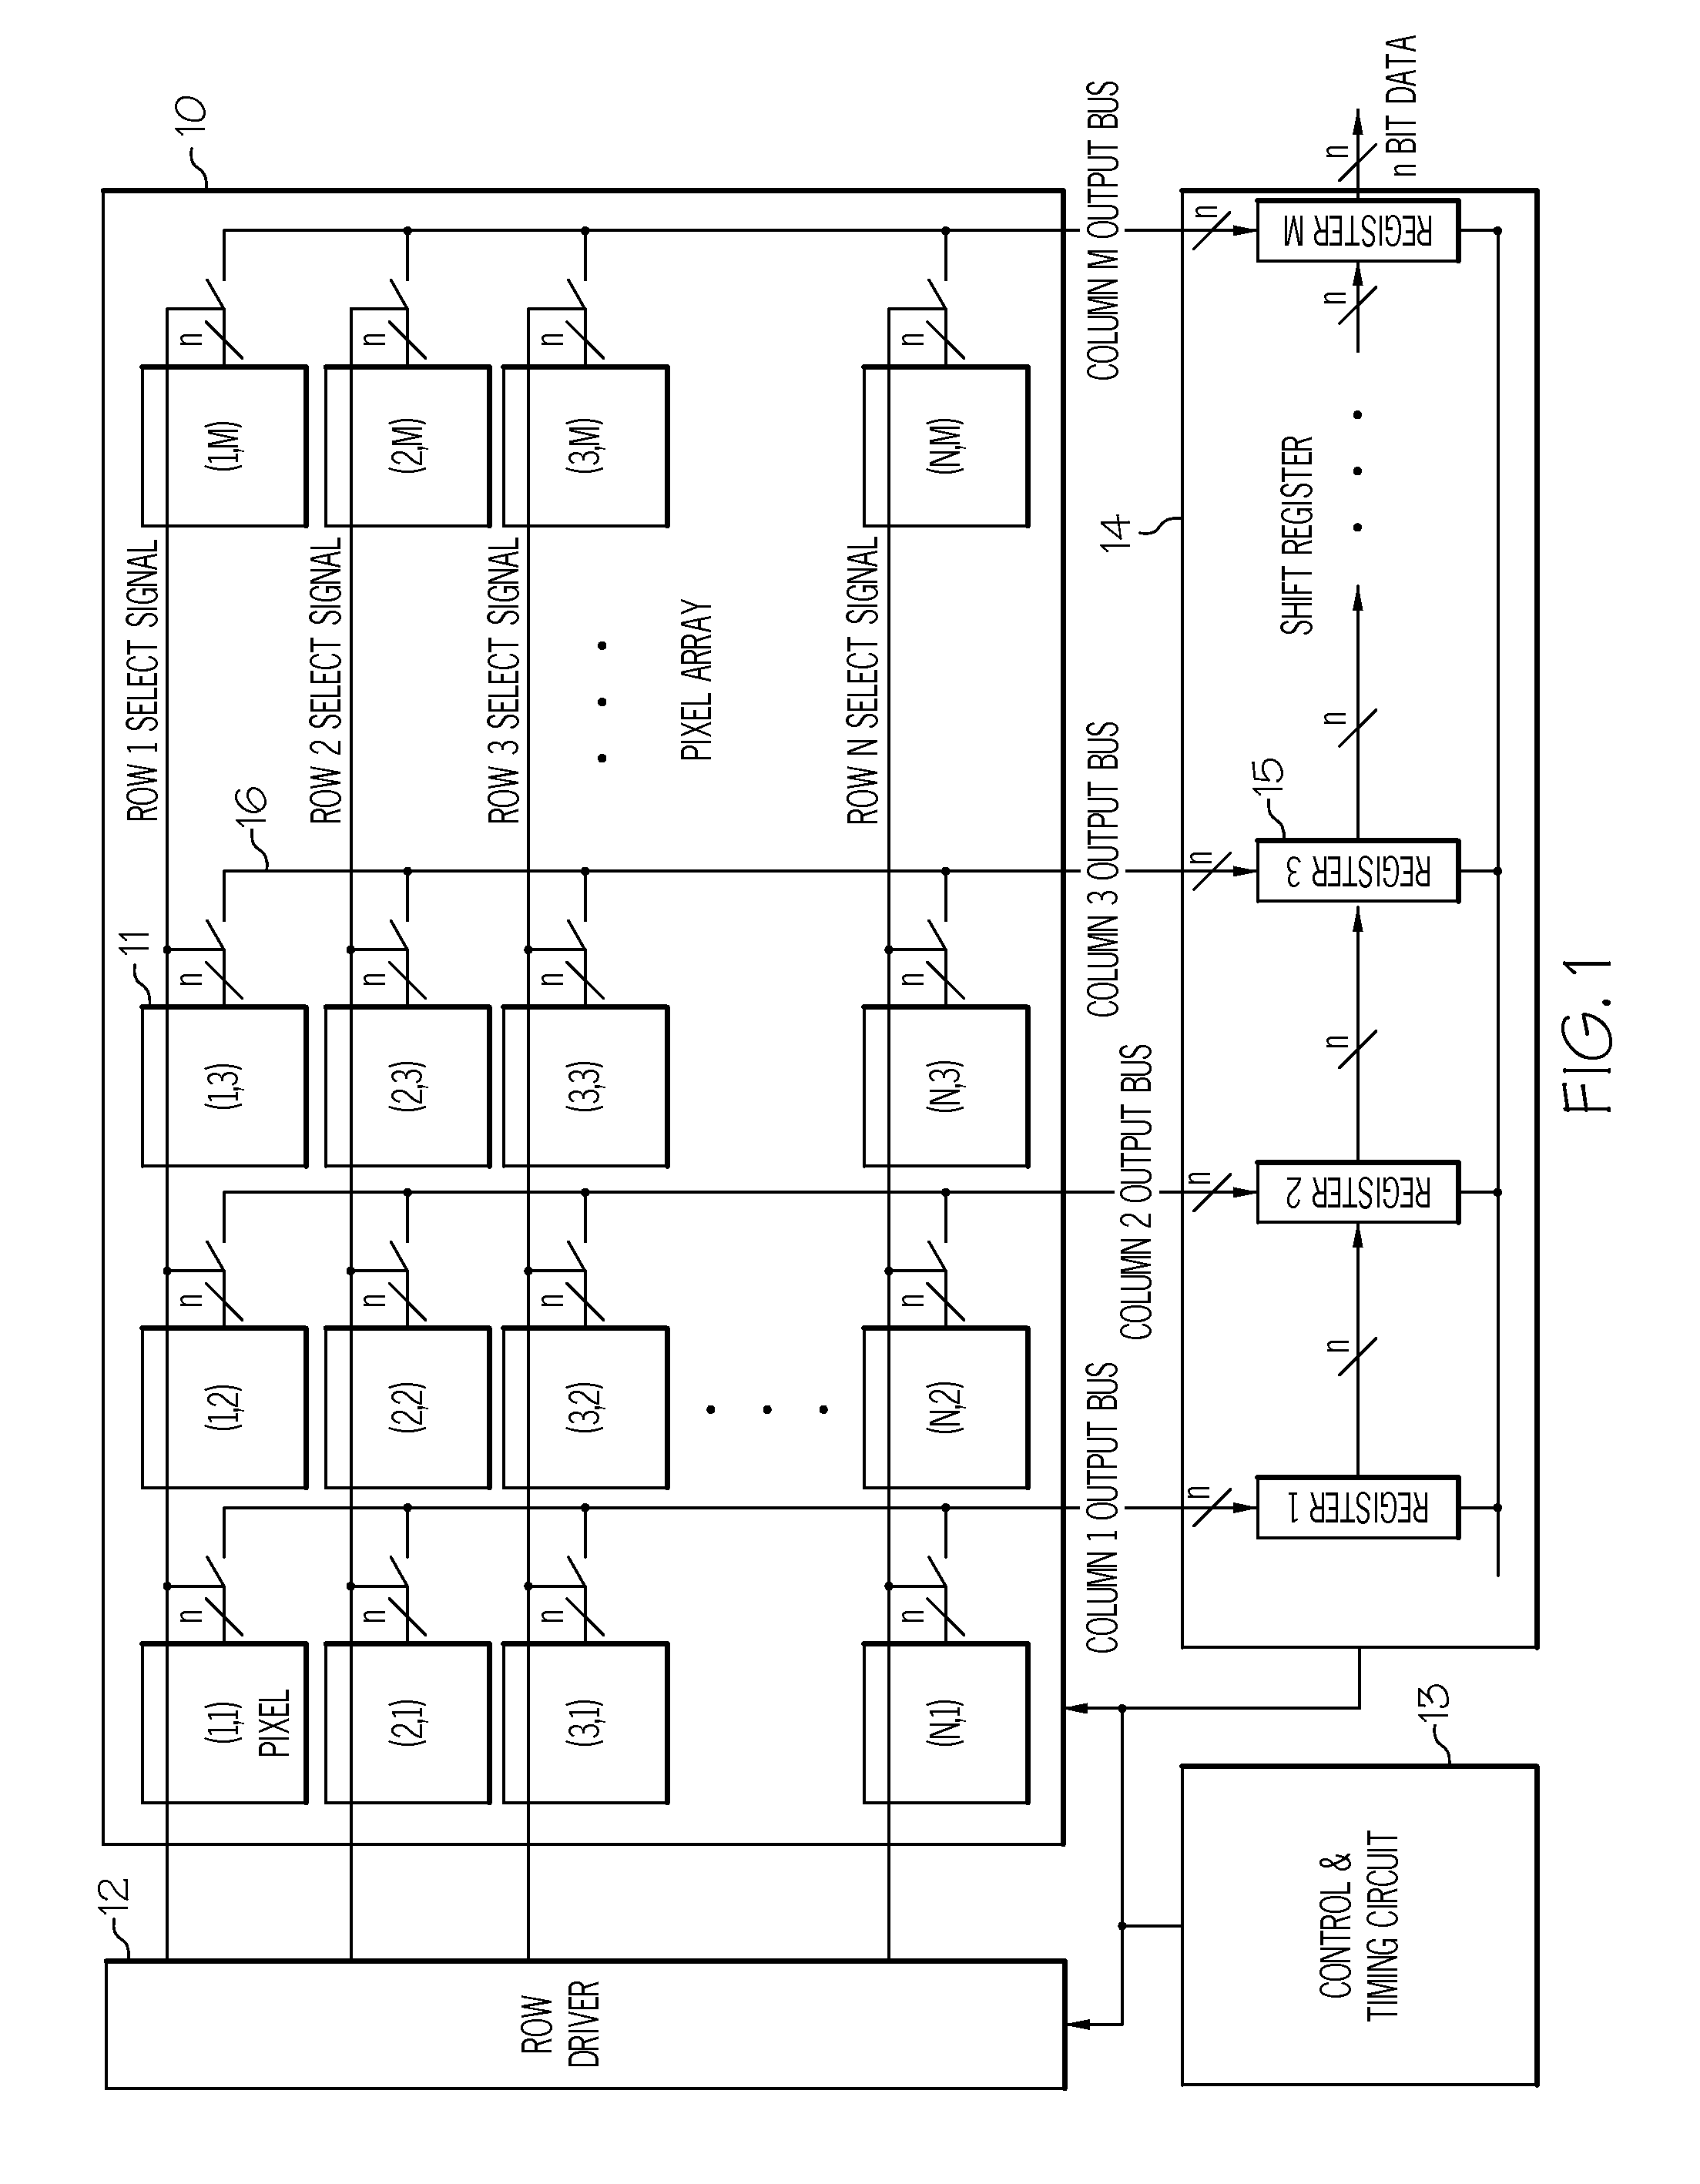 Programmable readout integrated circuit for an ionizing radiation sensor